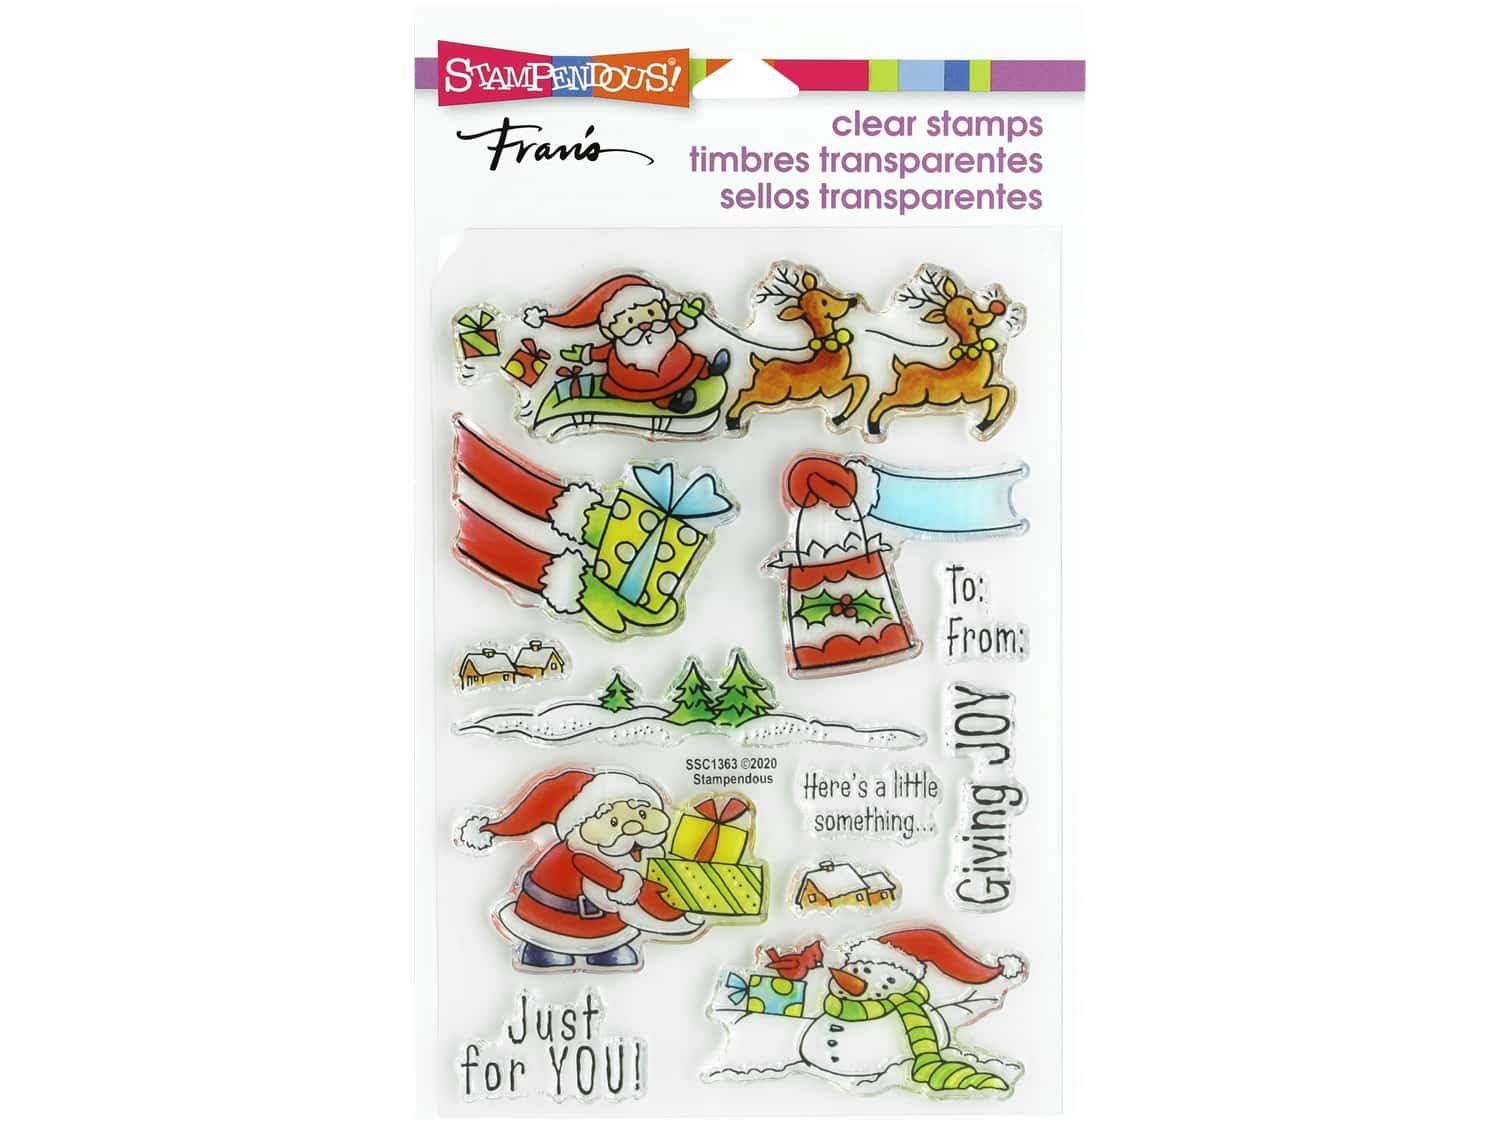 Stampendous Perfectly Clear Stamps - Christmas Gift